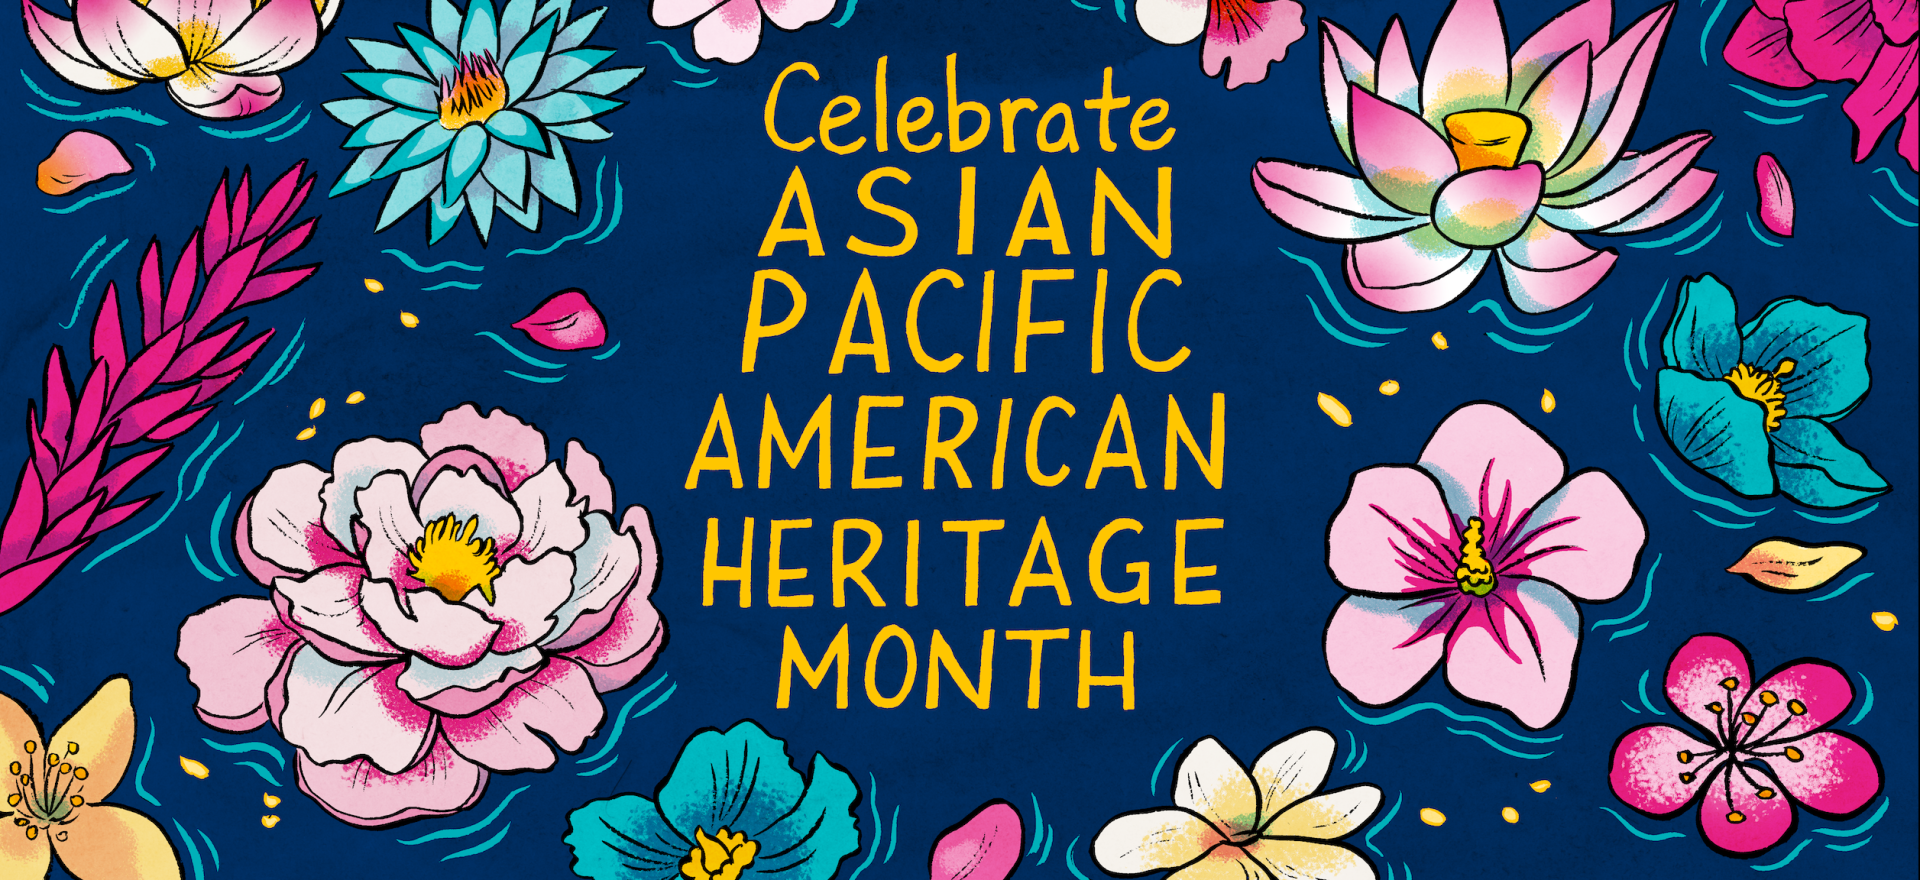 Asia Society celebrates Asian Pacific American Heritage Month